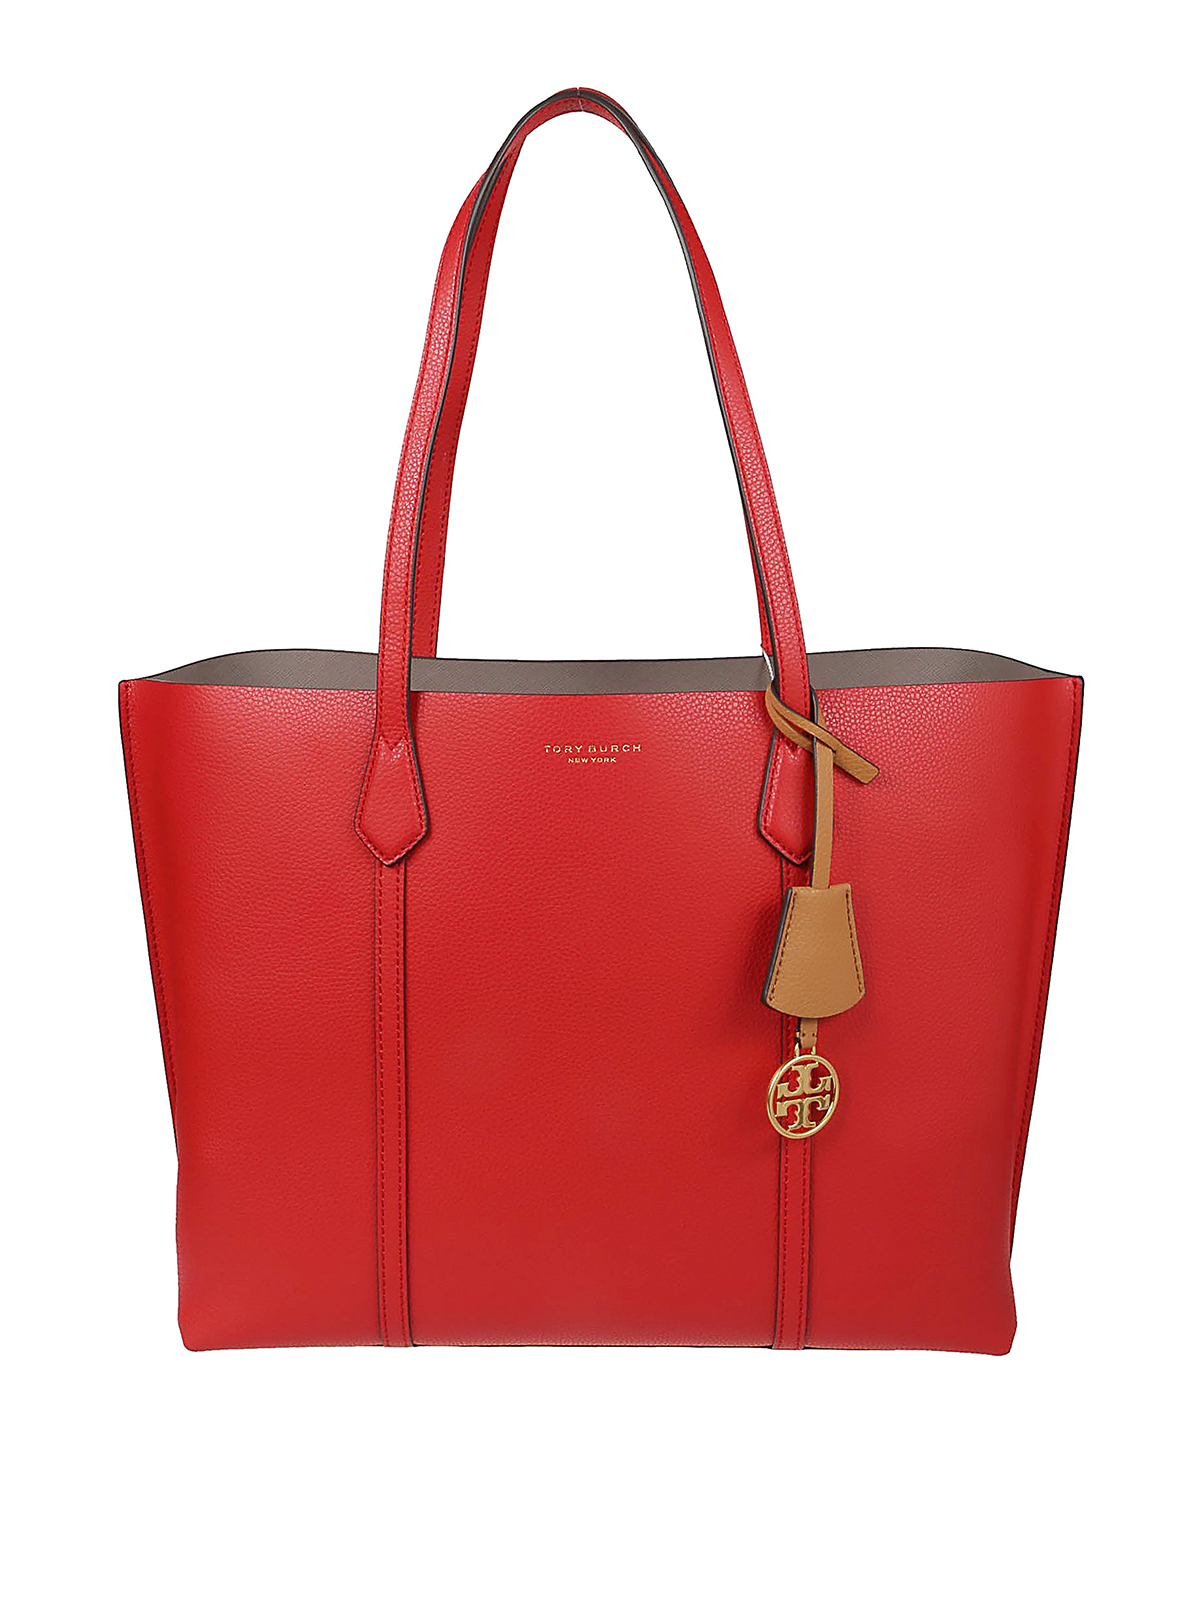 TORY BURCH PERRY TRIPLE COMPARTMENT RED LEATHER BAG